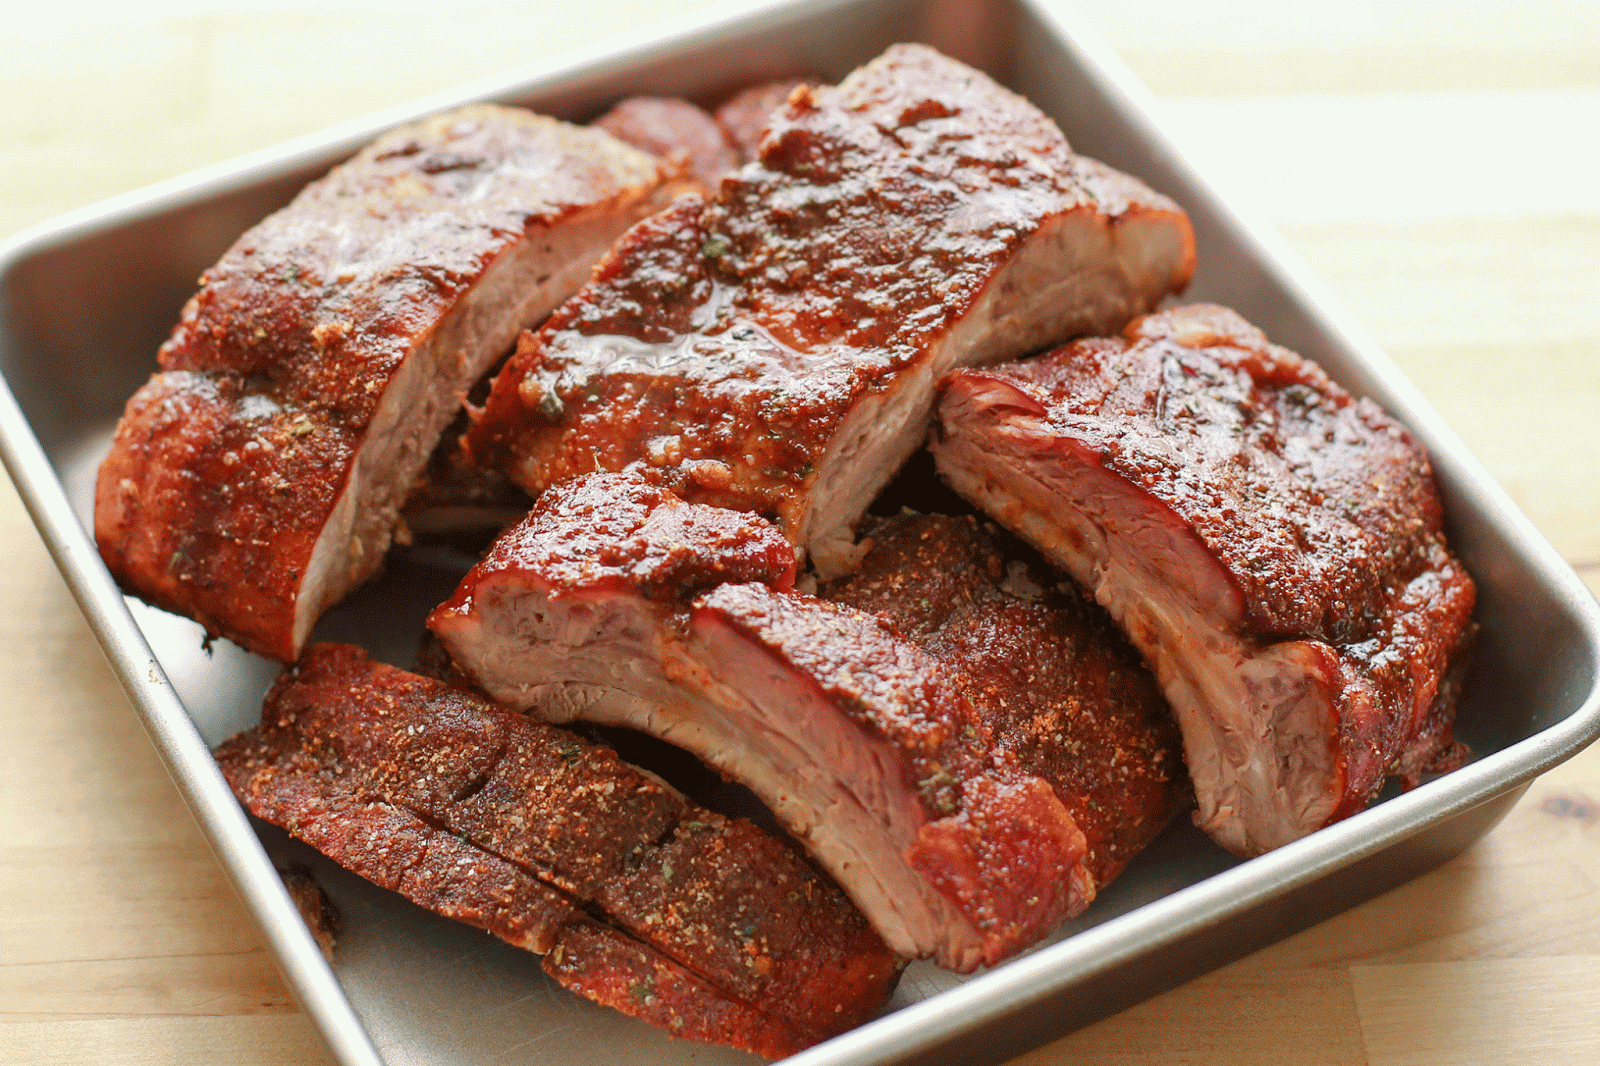 Memphis Style Dry Ribs On The Grill Or In The Oven Barefeet In The Kitchen,Cooking Prime Rib Roast In A Smoker